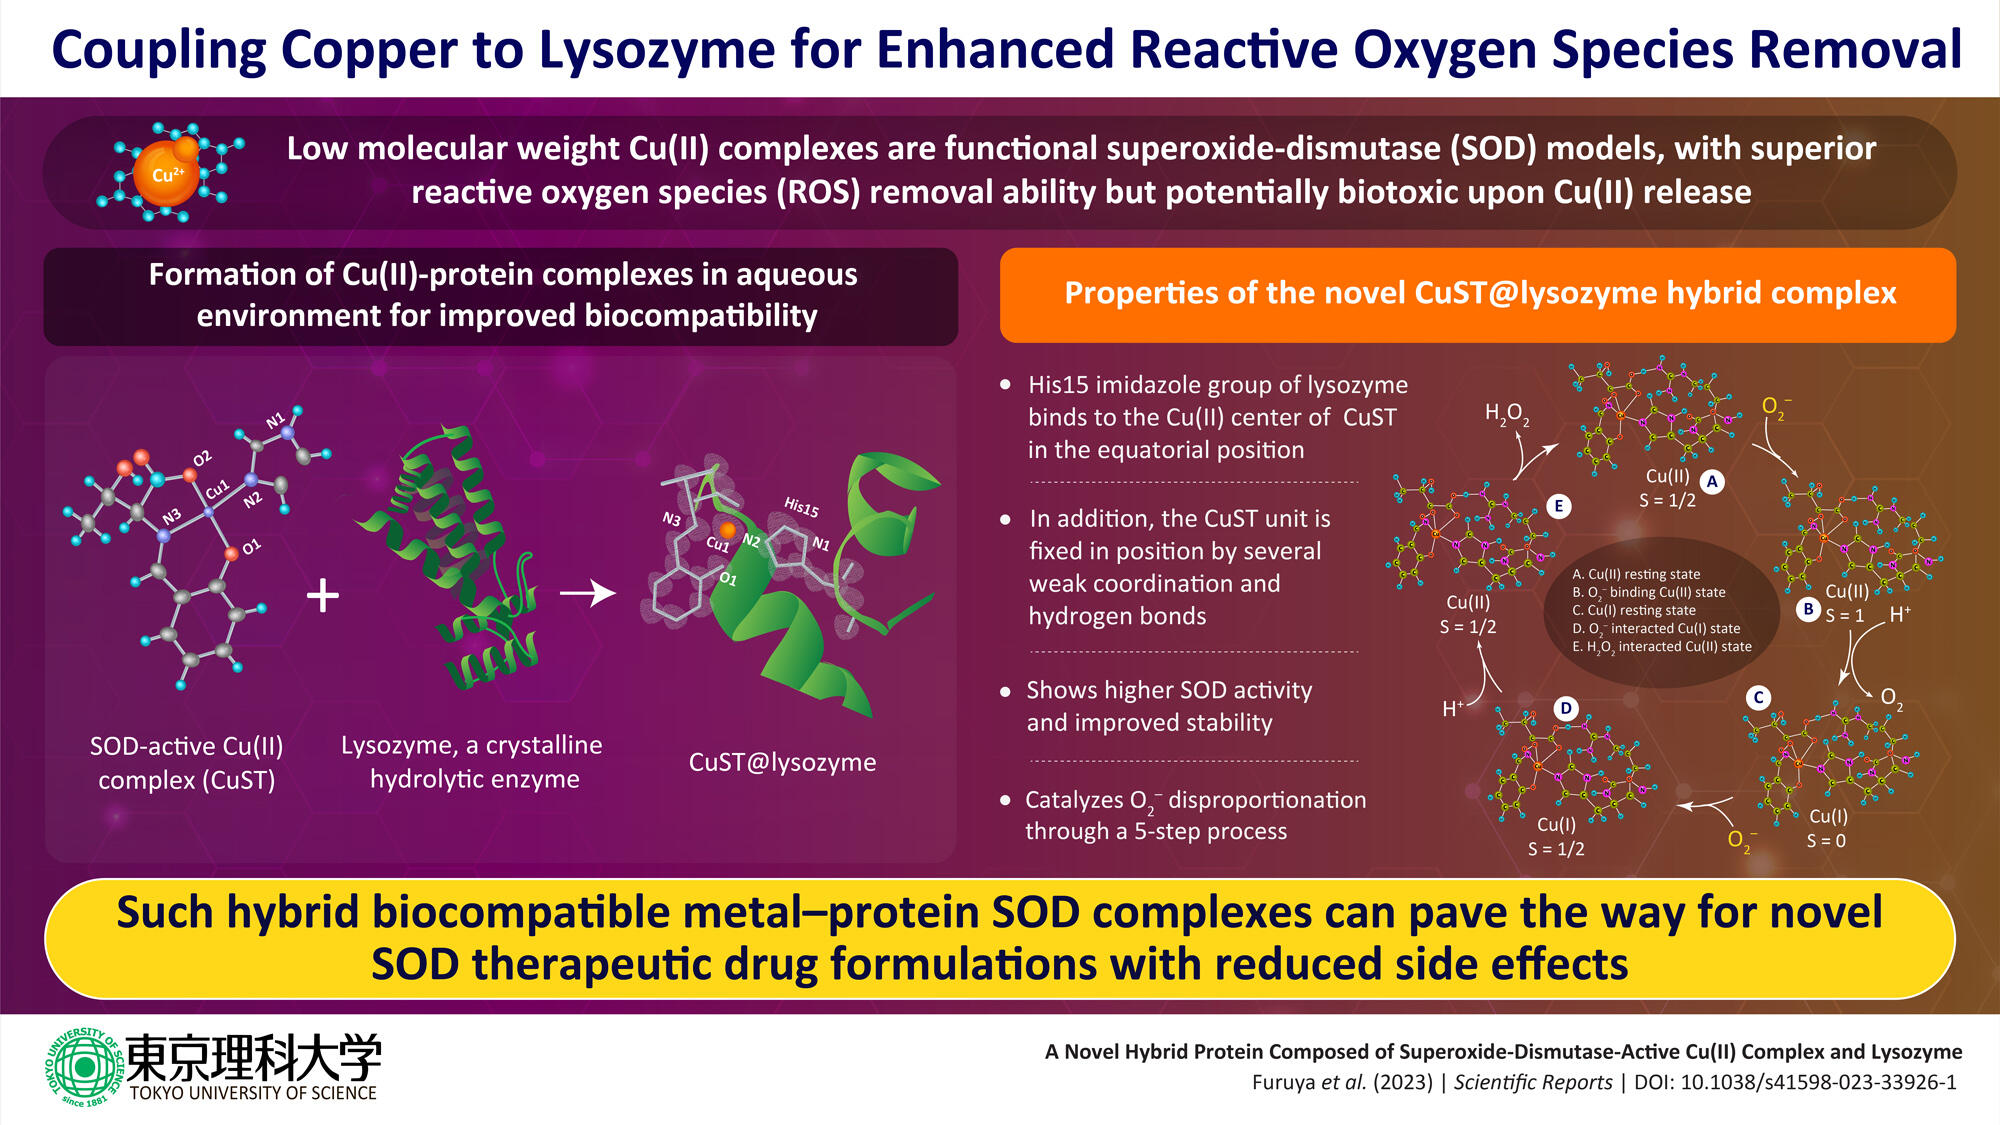 New Study Shows Superior Reactive Oxygen Species Removal Ability of Copper Coupled to Lysozyme